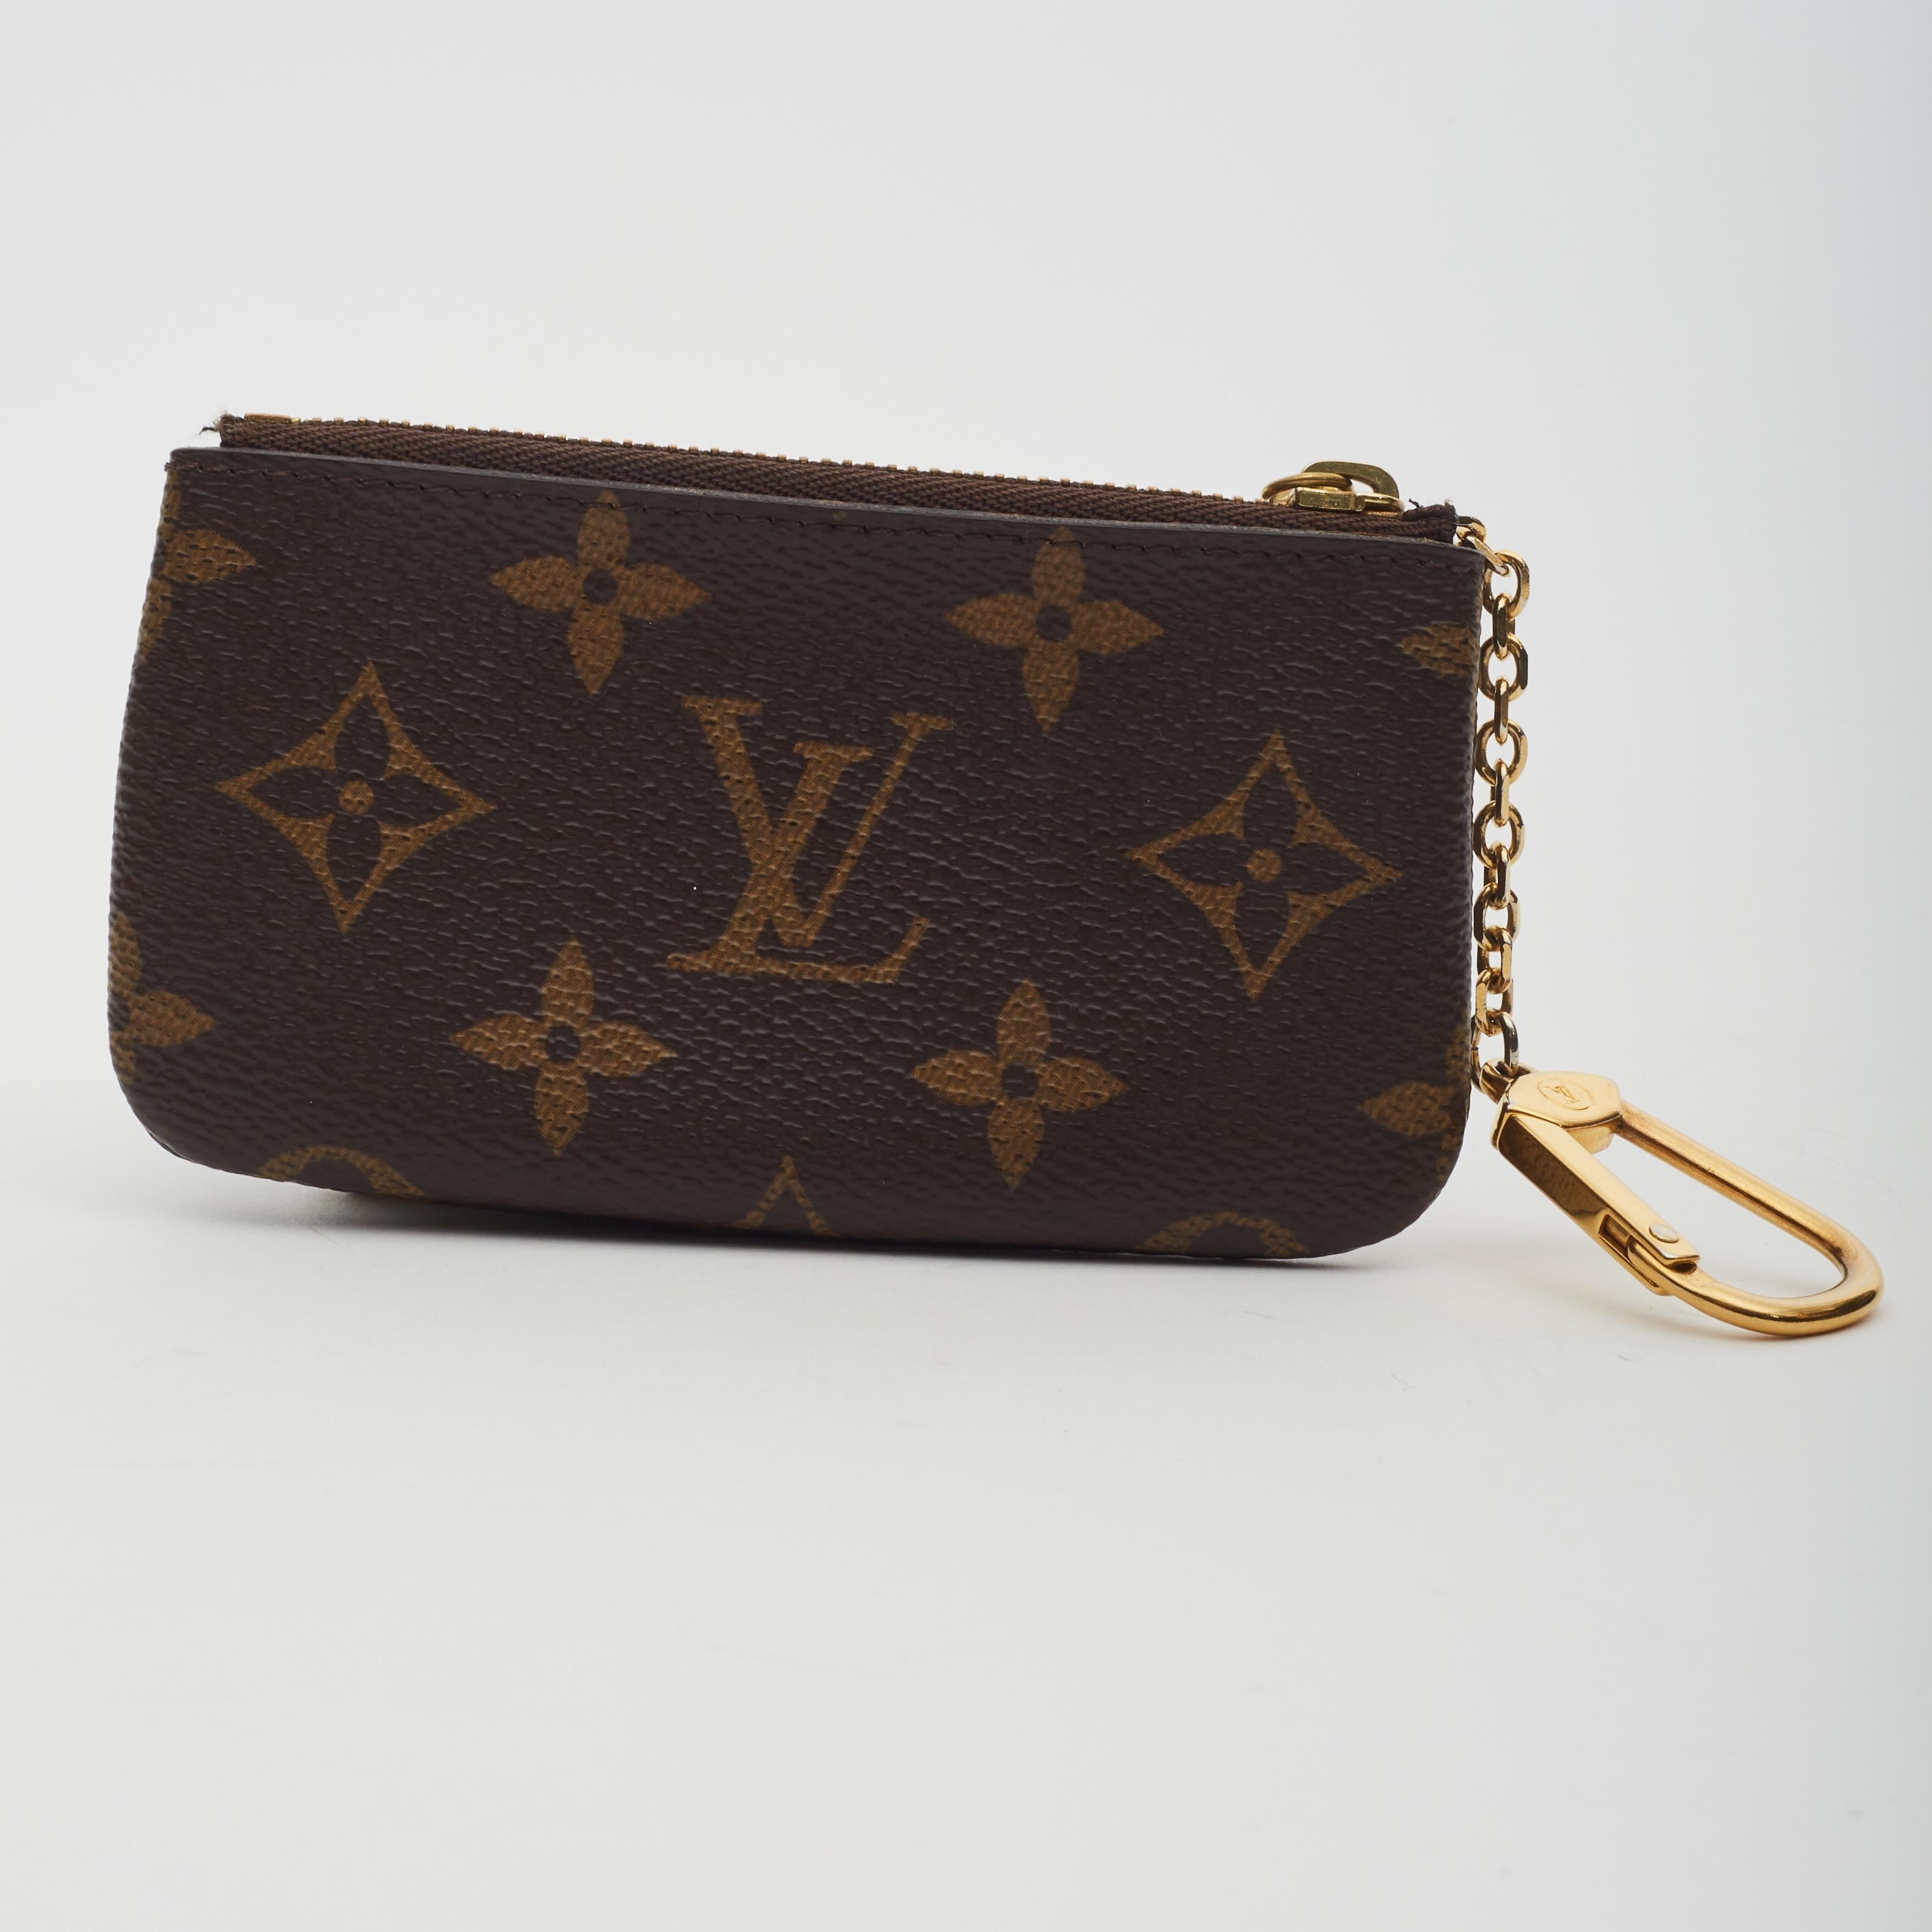 The holder is a small pouch of classic Louis Vuitton monogram on toile canvas with a brass top zipper. This opens to a brown cross-grained leather interior with a D-ring clasp.

Color: Brown monogram print
Material: Coated canvas with vachetta